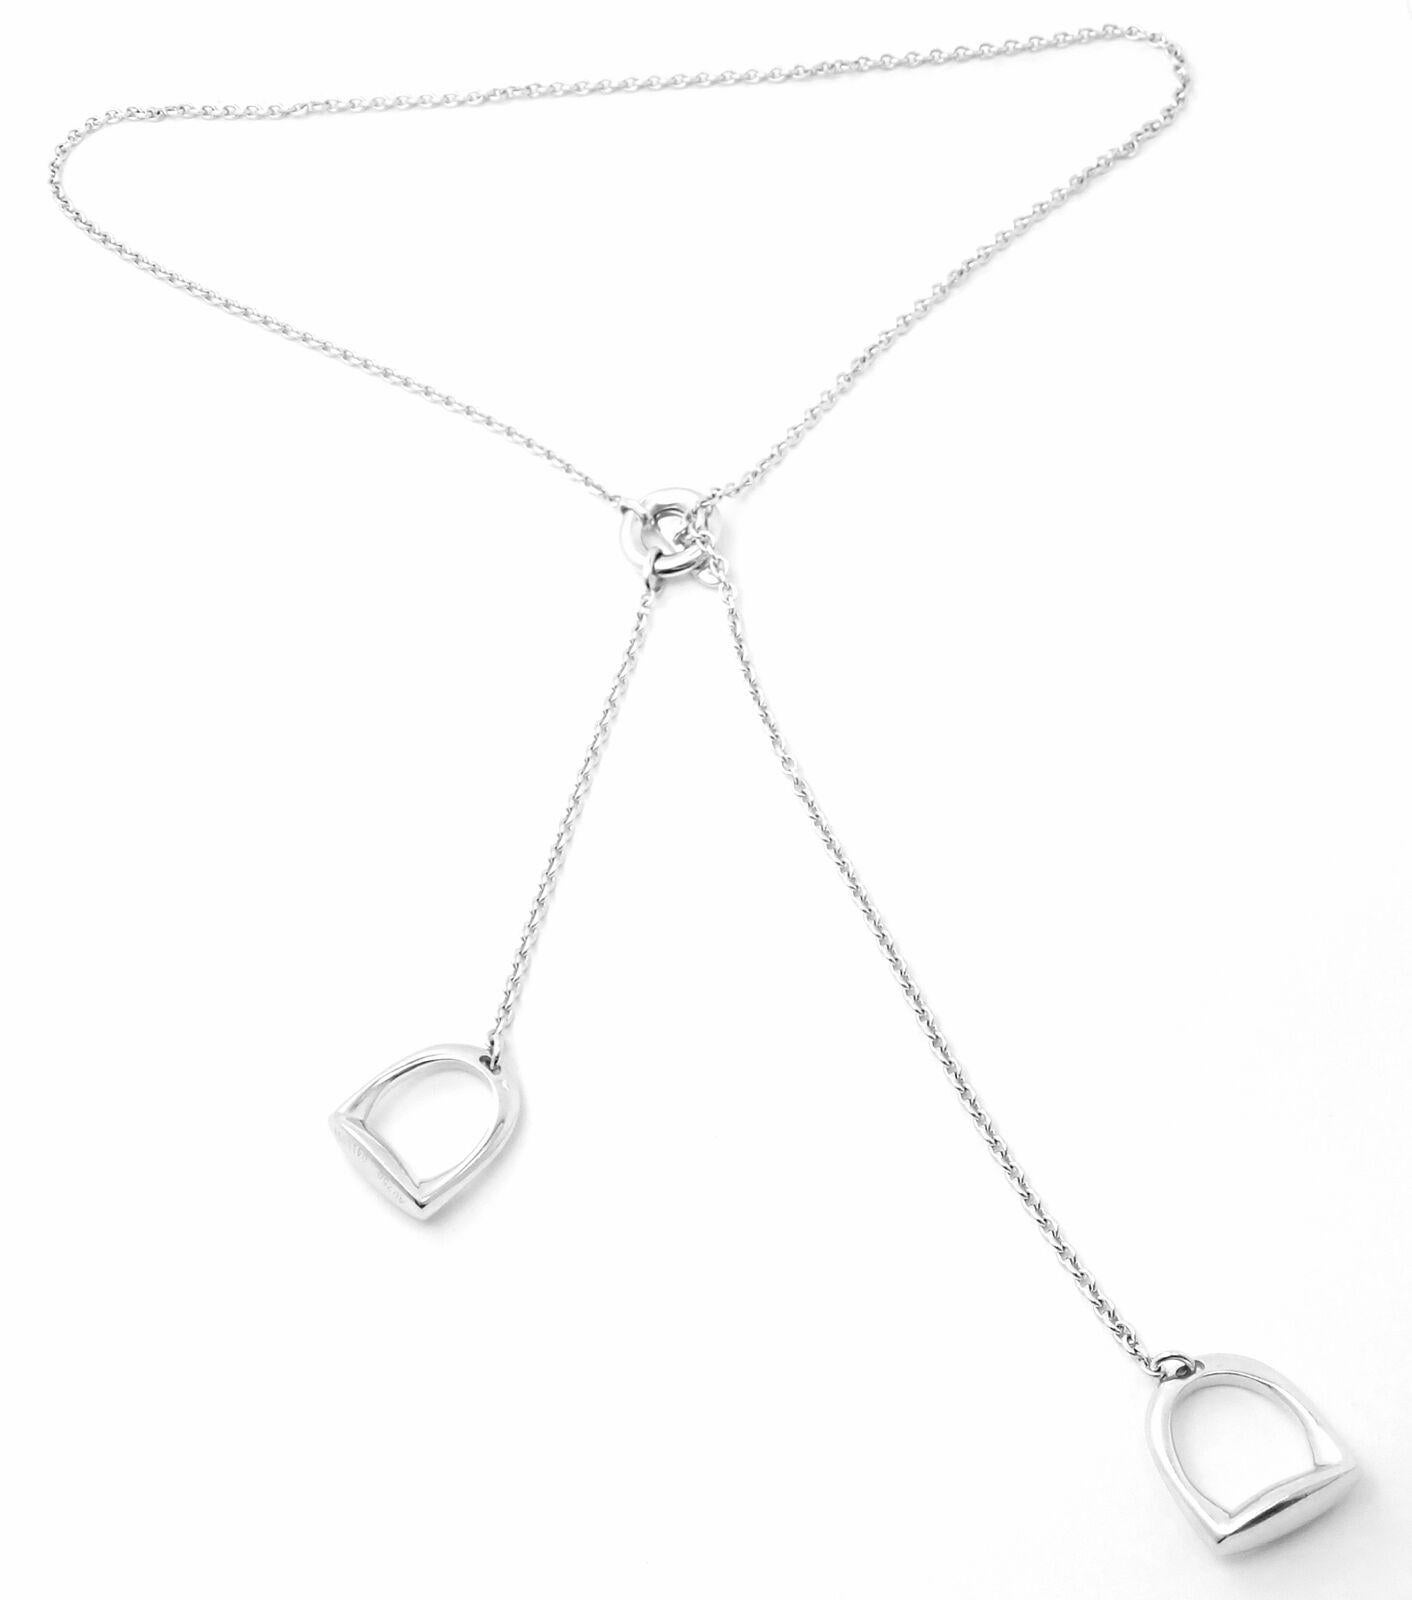 18k White Gold Stirrup Lariat Link Chain Necklace by Hermes.
Details: 
Weight: 26.3 grams
Length: Chain Length: 15